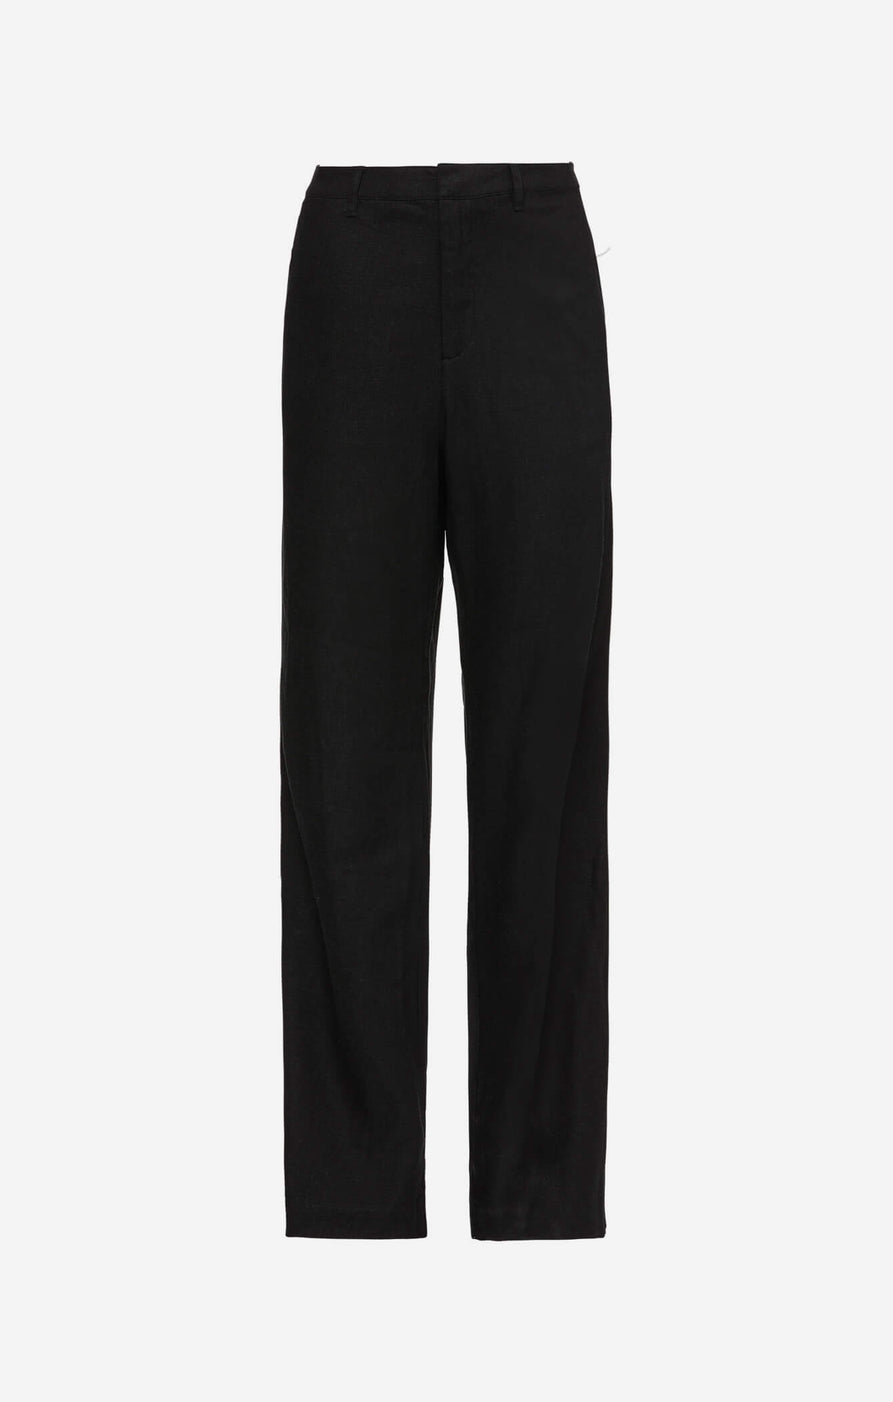 THE LINEN CLASSIC PANT - BLACK – All Things Golden